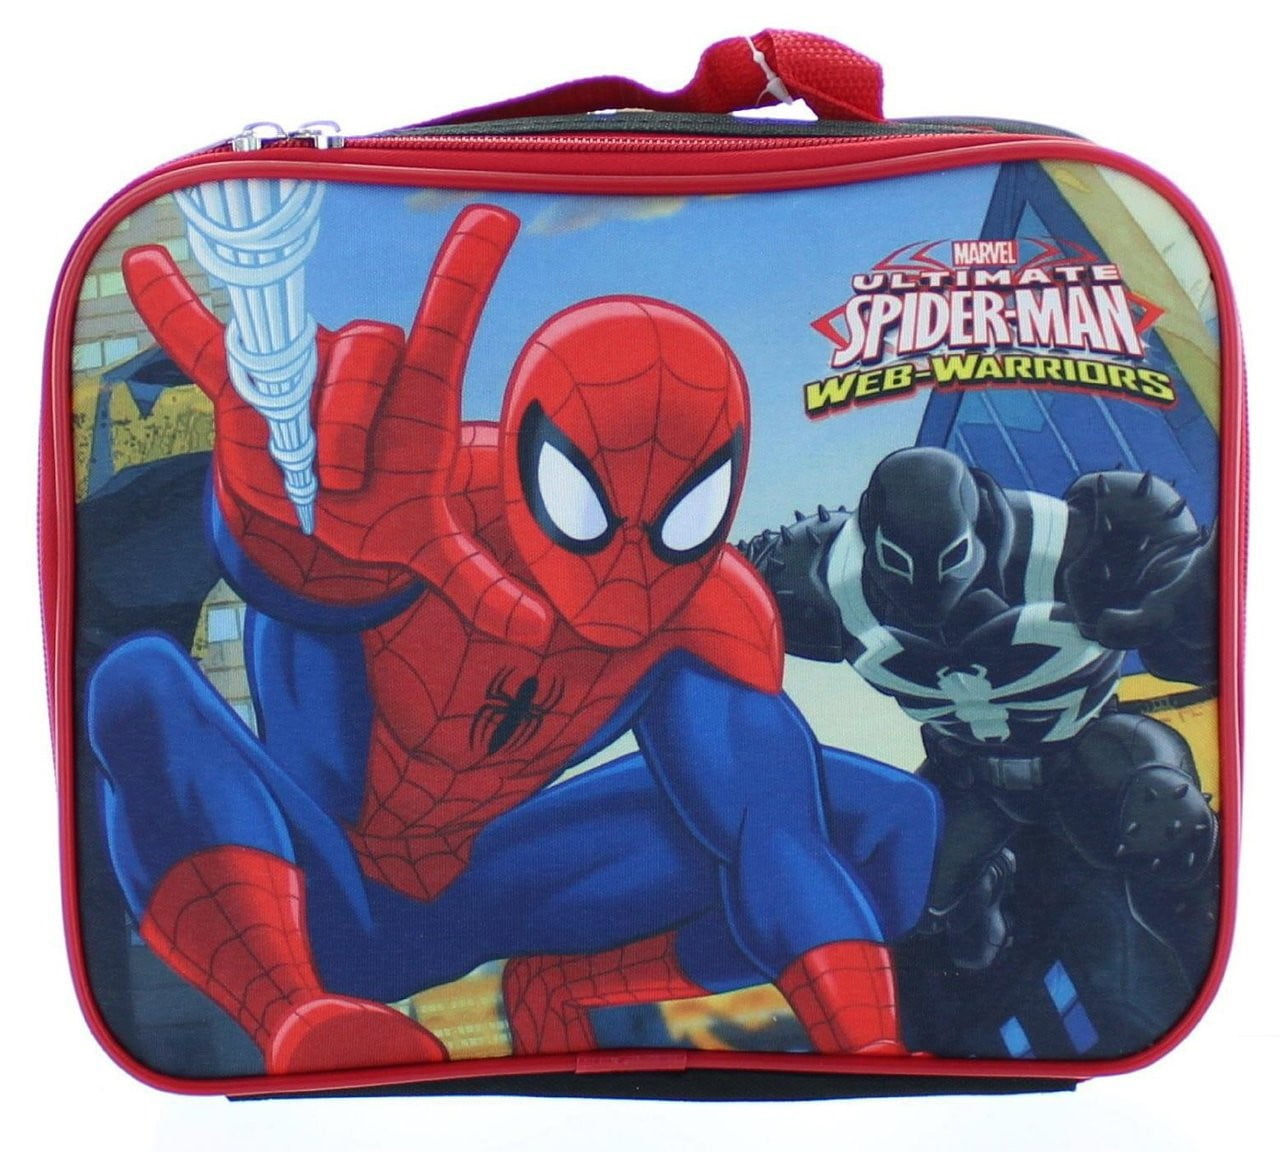 ULTIMATE SPIDER-MAN Dual-Chamber Lead-Safe Insulated Lunch Tote Box NWT  $25 